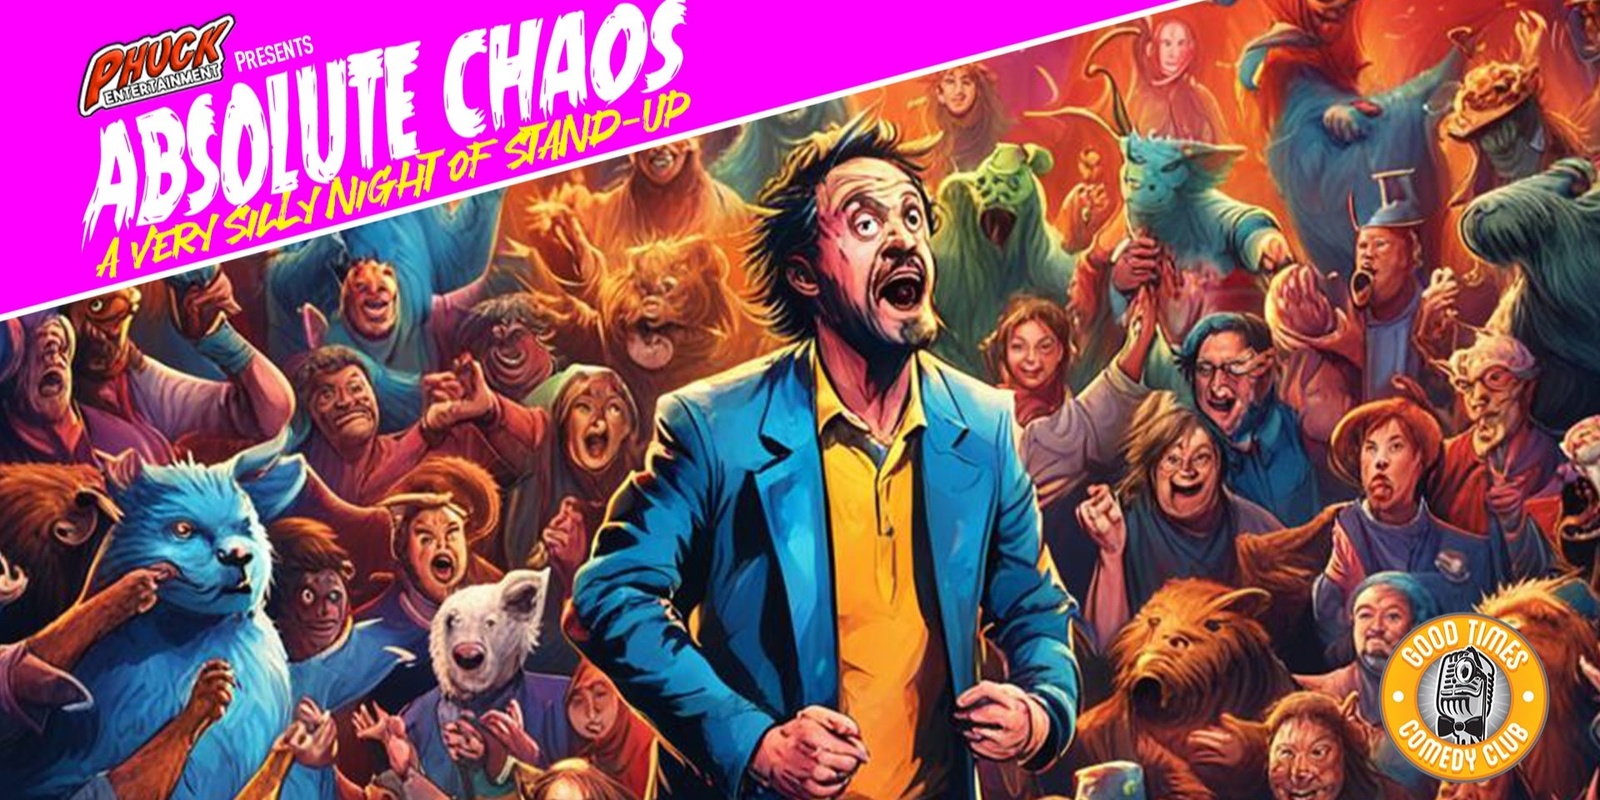 Banner image for Absolute Chaos - A Very Silly Night of Stand-up